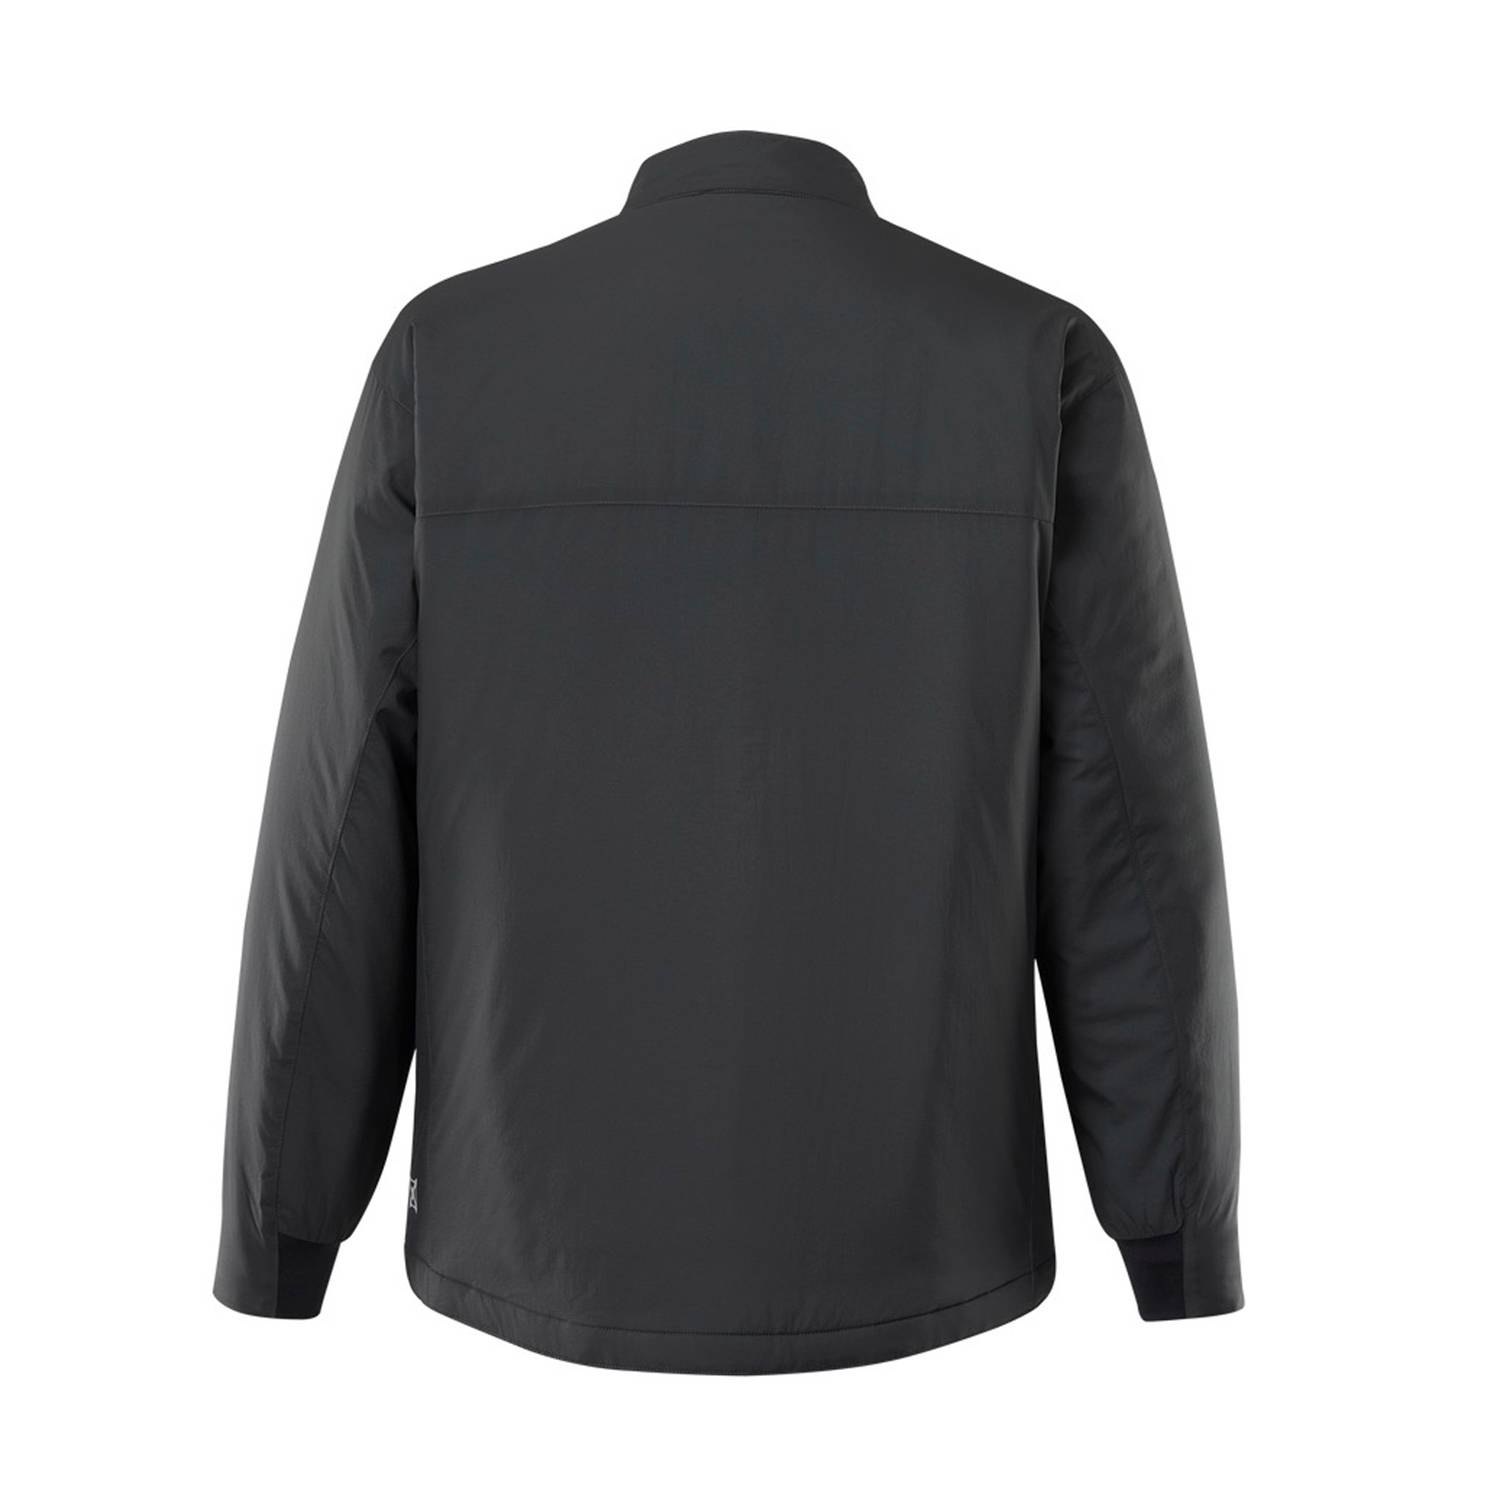 Vertx Integrity P Jacket | Insulated Jackets